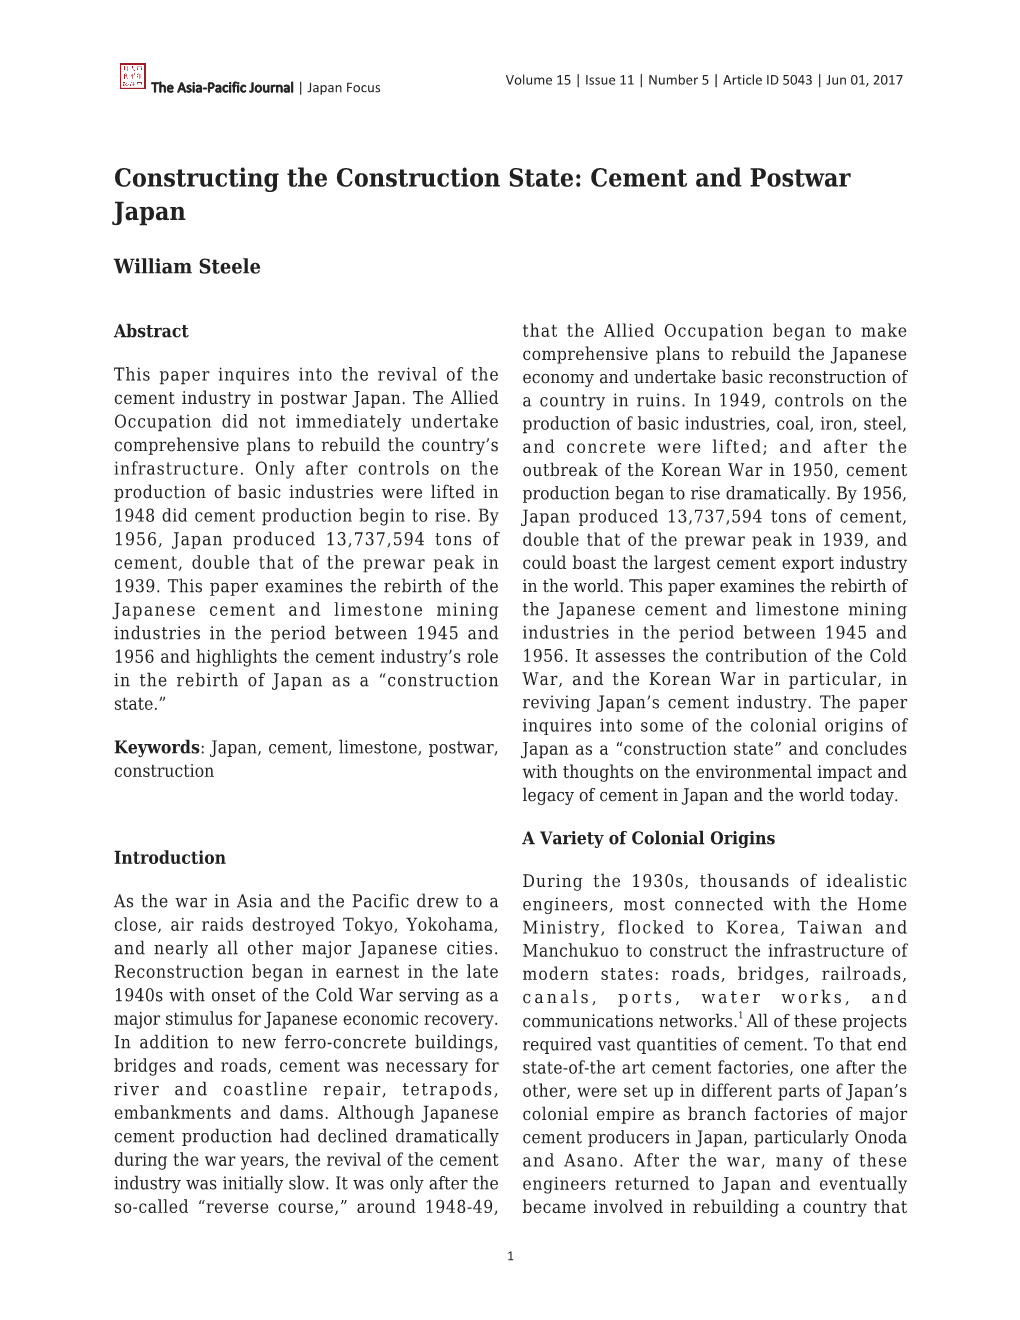 Constructing the Construction State: Cement and Postwar Japan